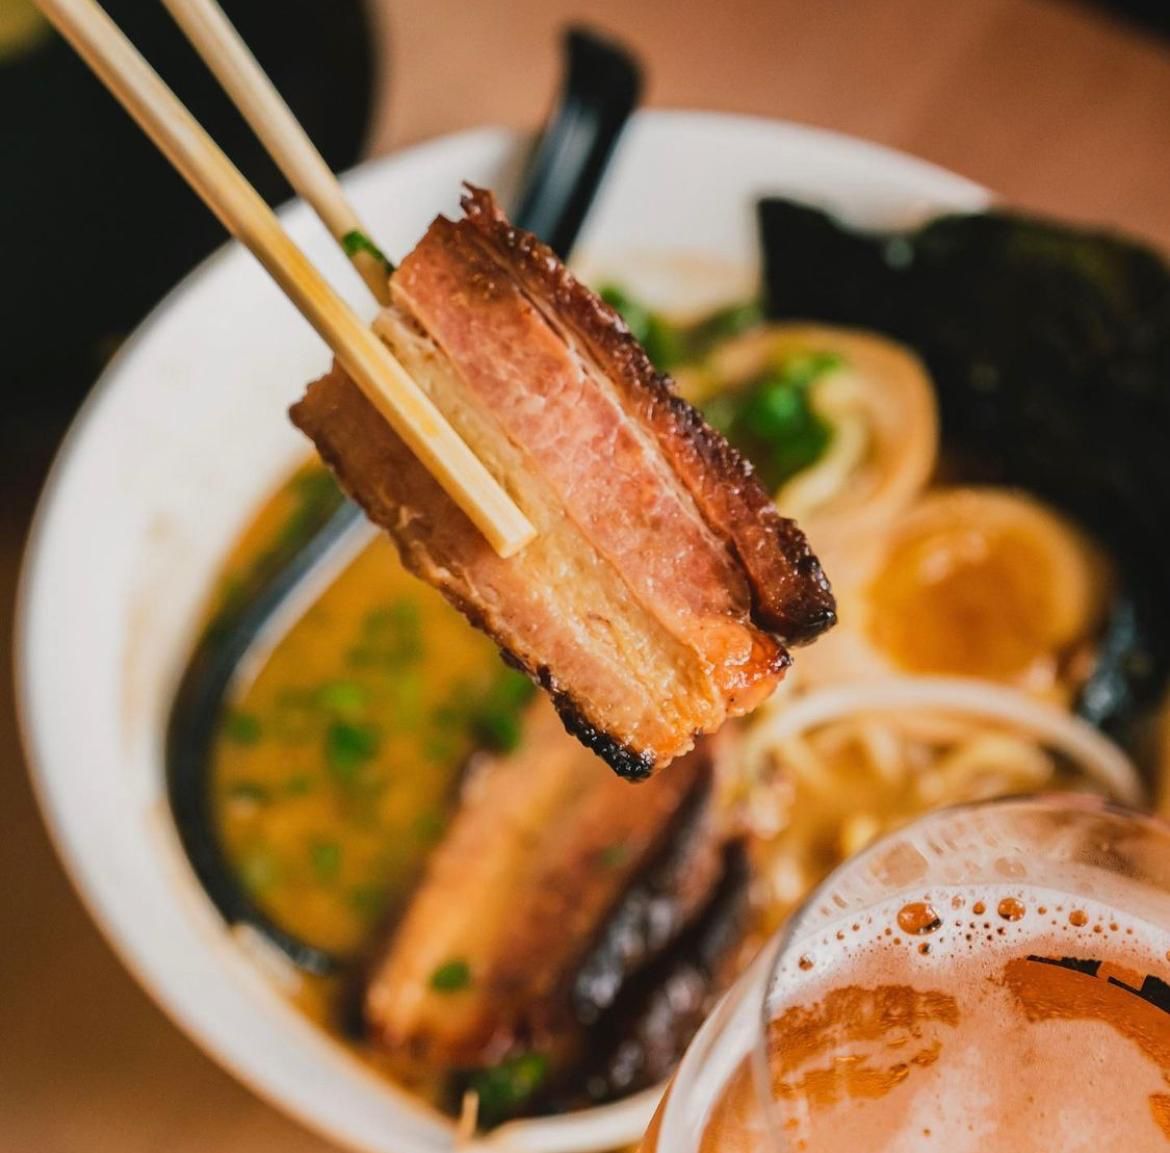 Ancoats&#8217; tiny new ramen restaurant with space for just a dozen diners, The Manc